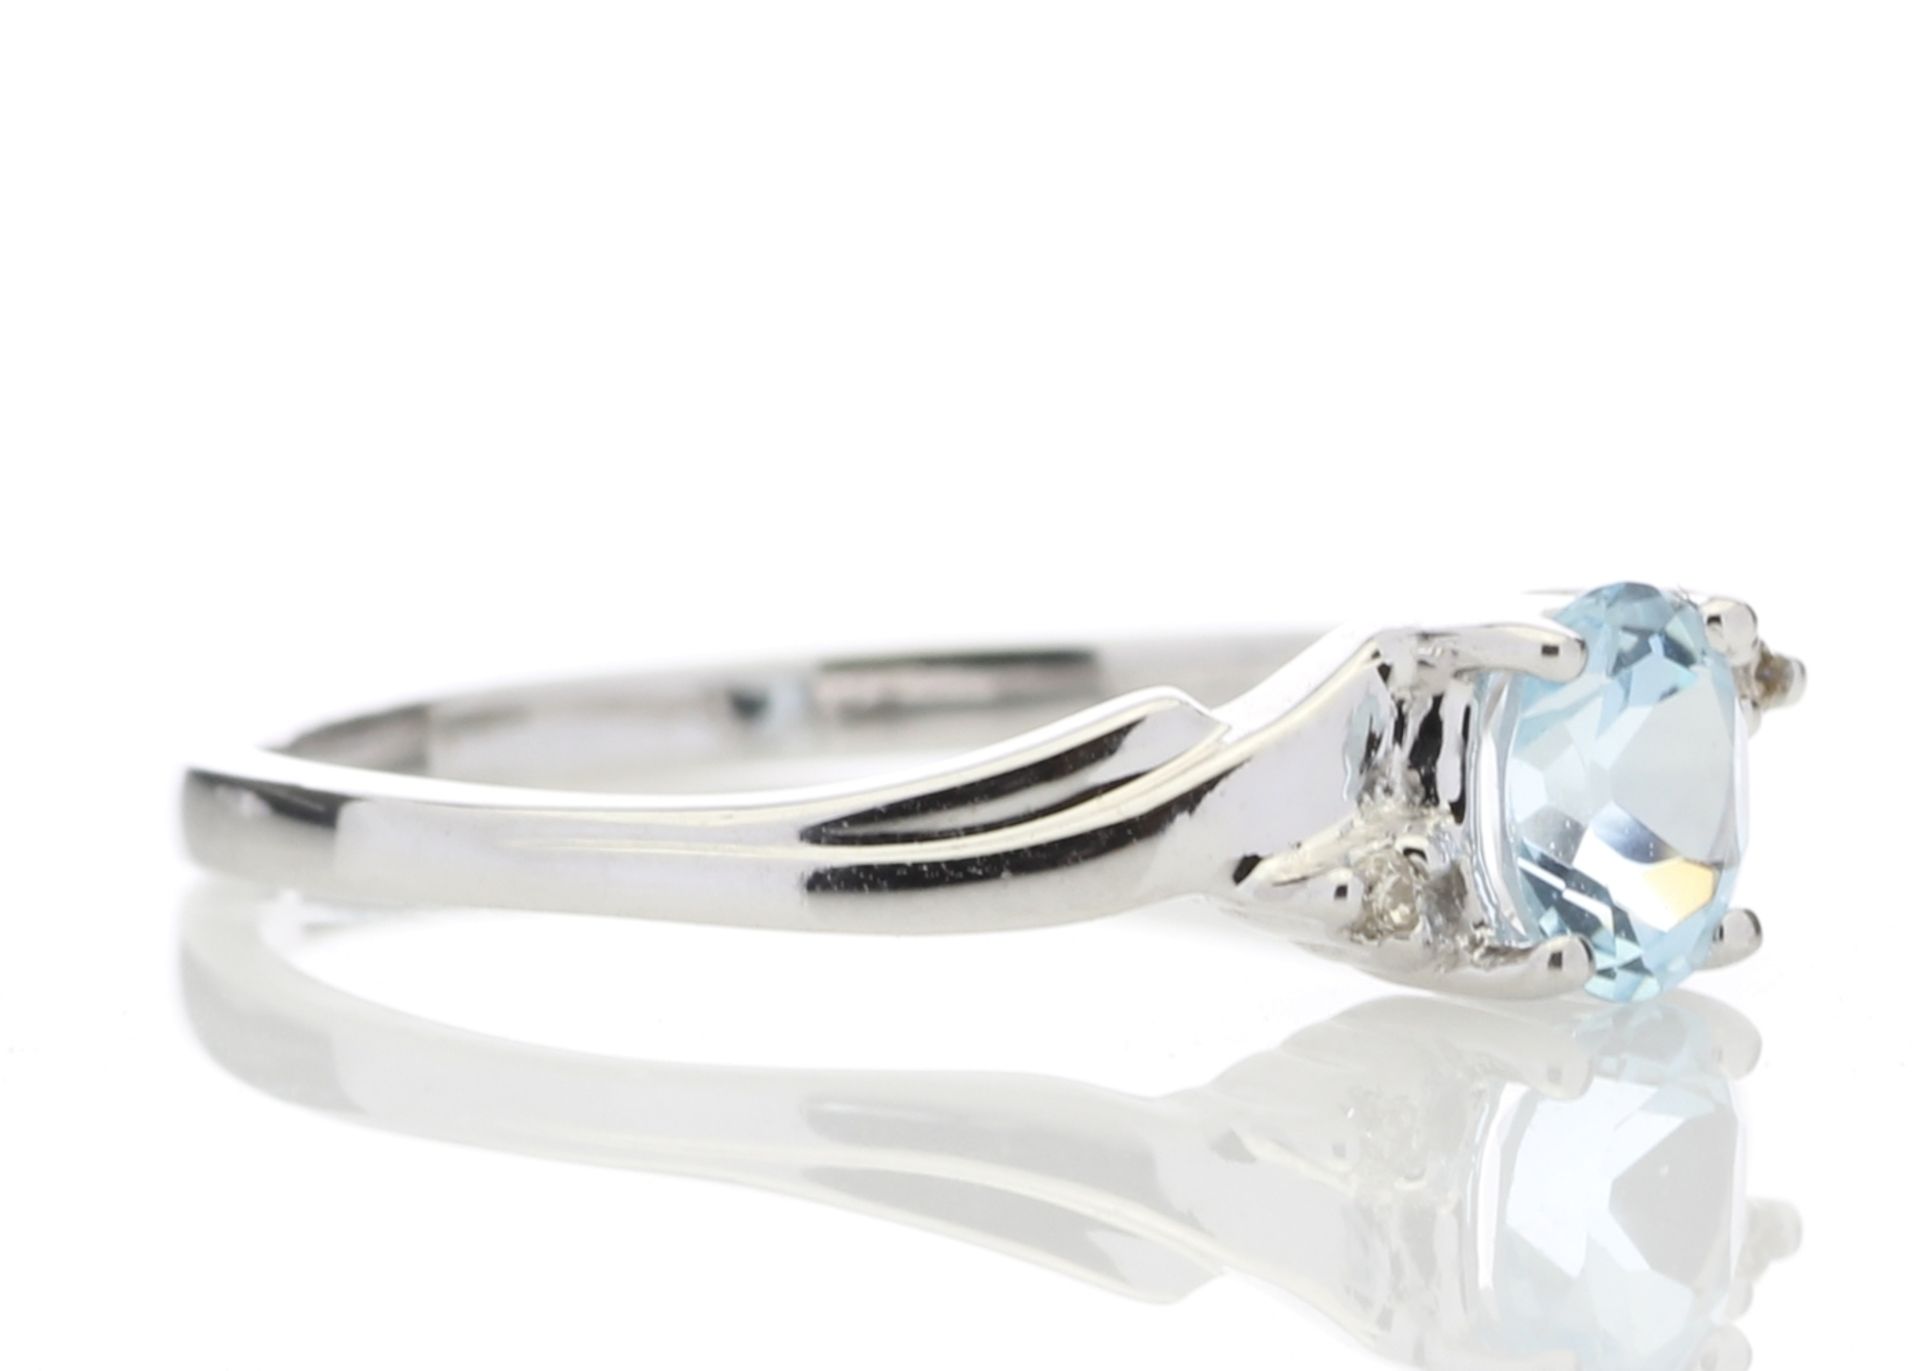 9ct White Gold Diamond and Blue Topaz Ring 0.01 Carats - Image 4 of 8